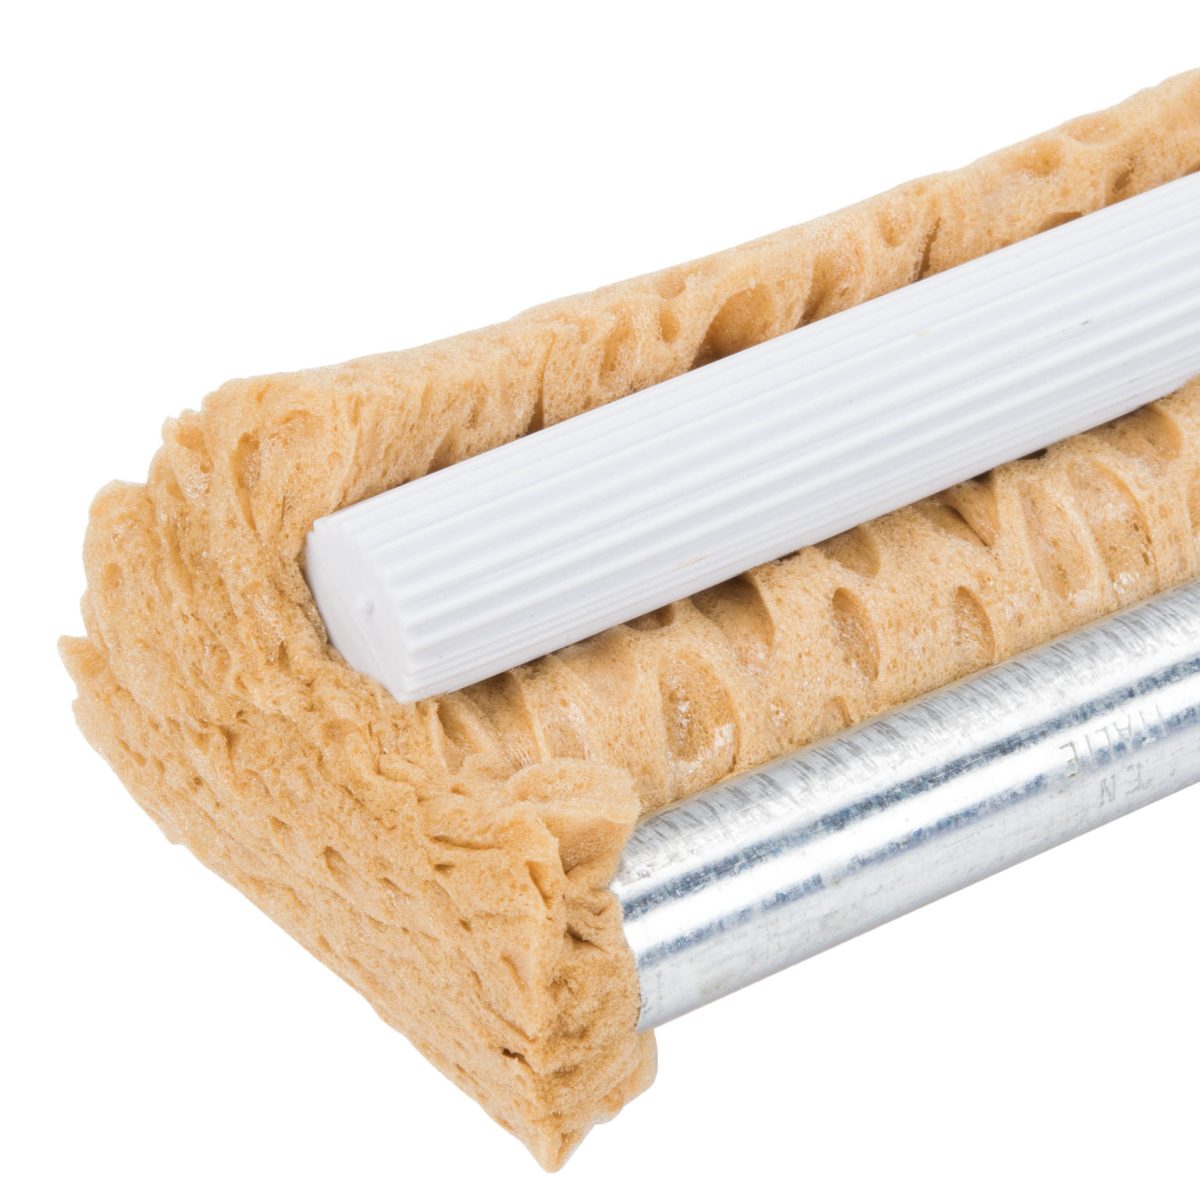 Integrity Replacement Cellulose Sponge Mop Head